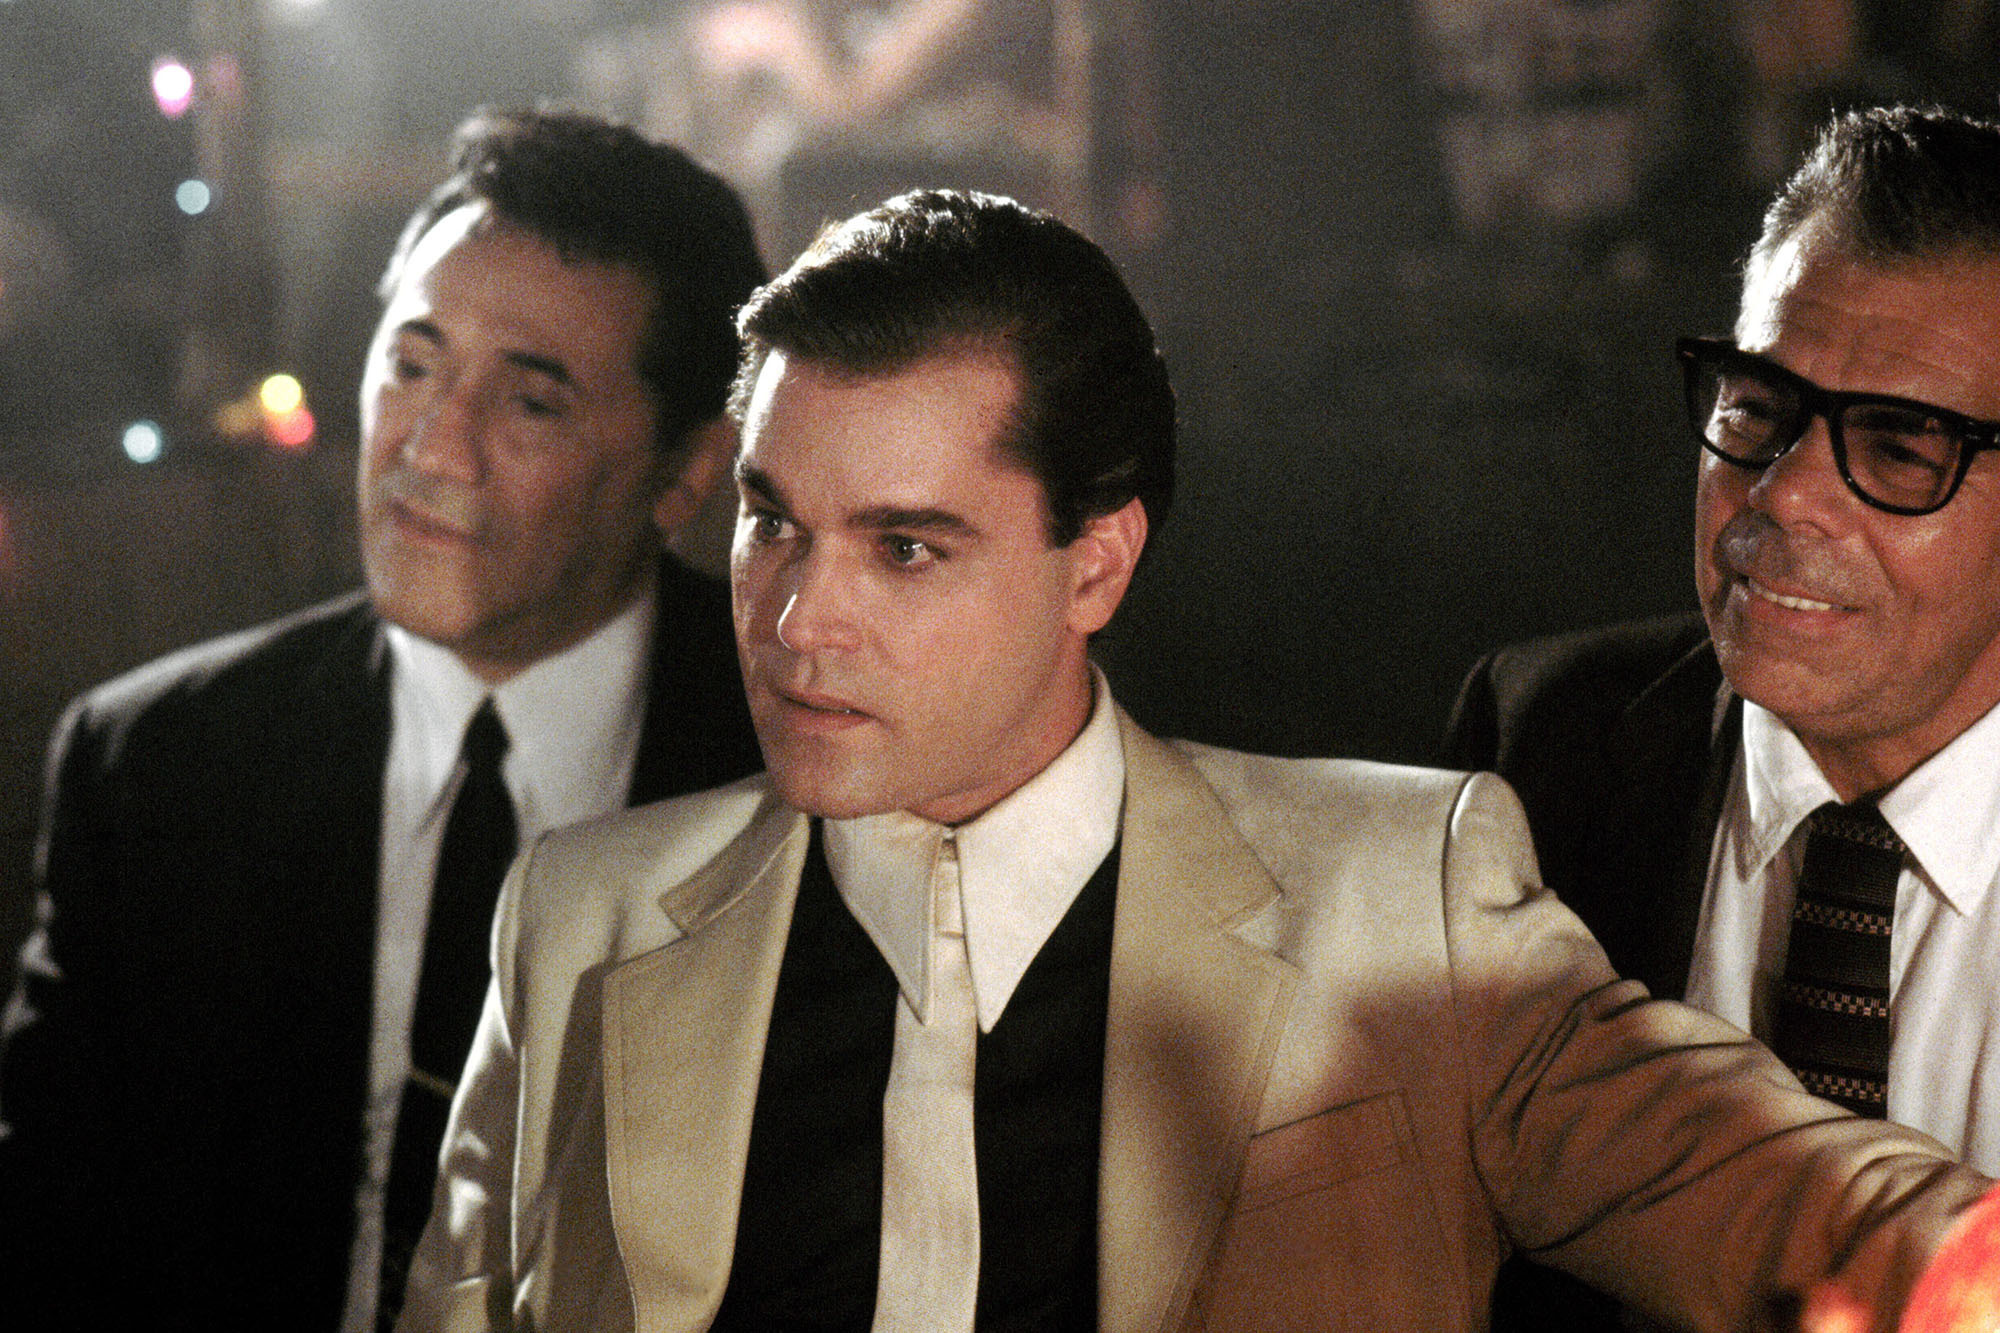 Ray Liotta: Goodfellas, Henry Hill, A 1990 American biographical crime film. 2000x1340 HD Wallpaper.